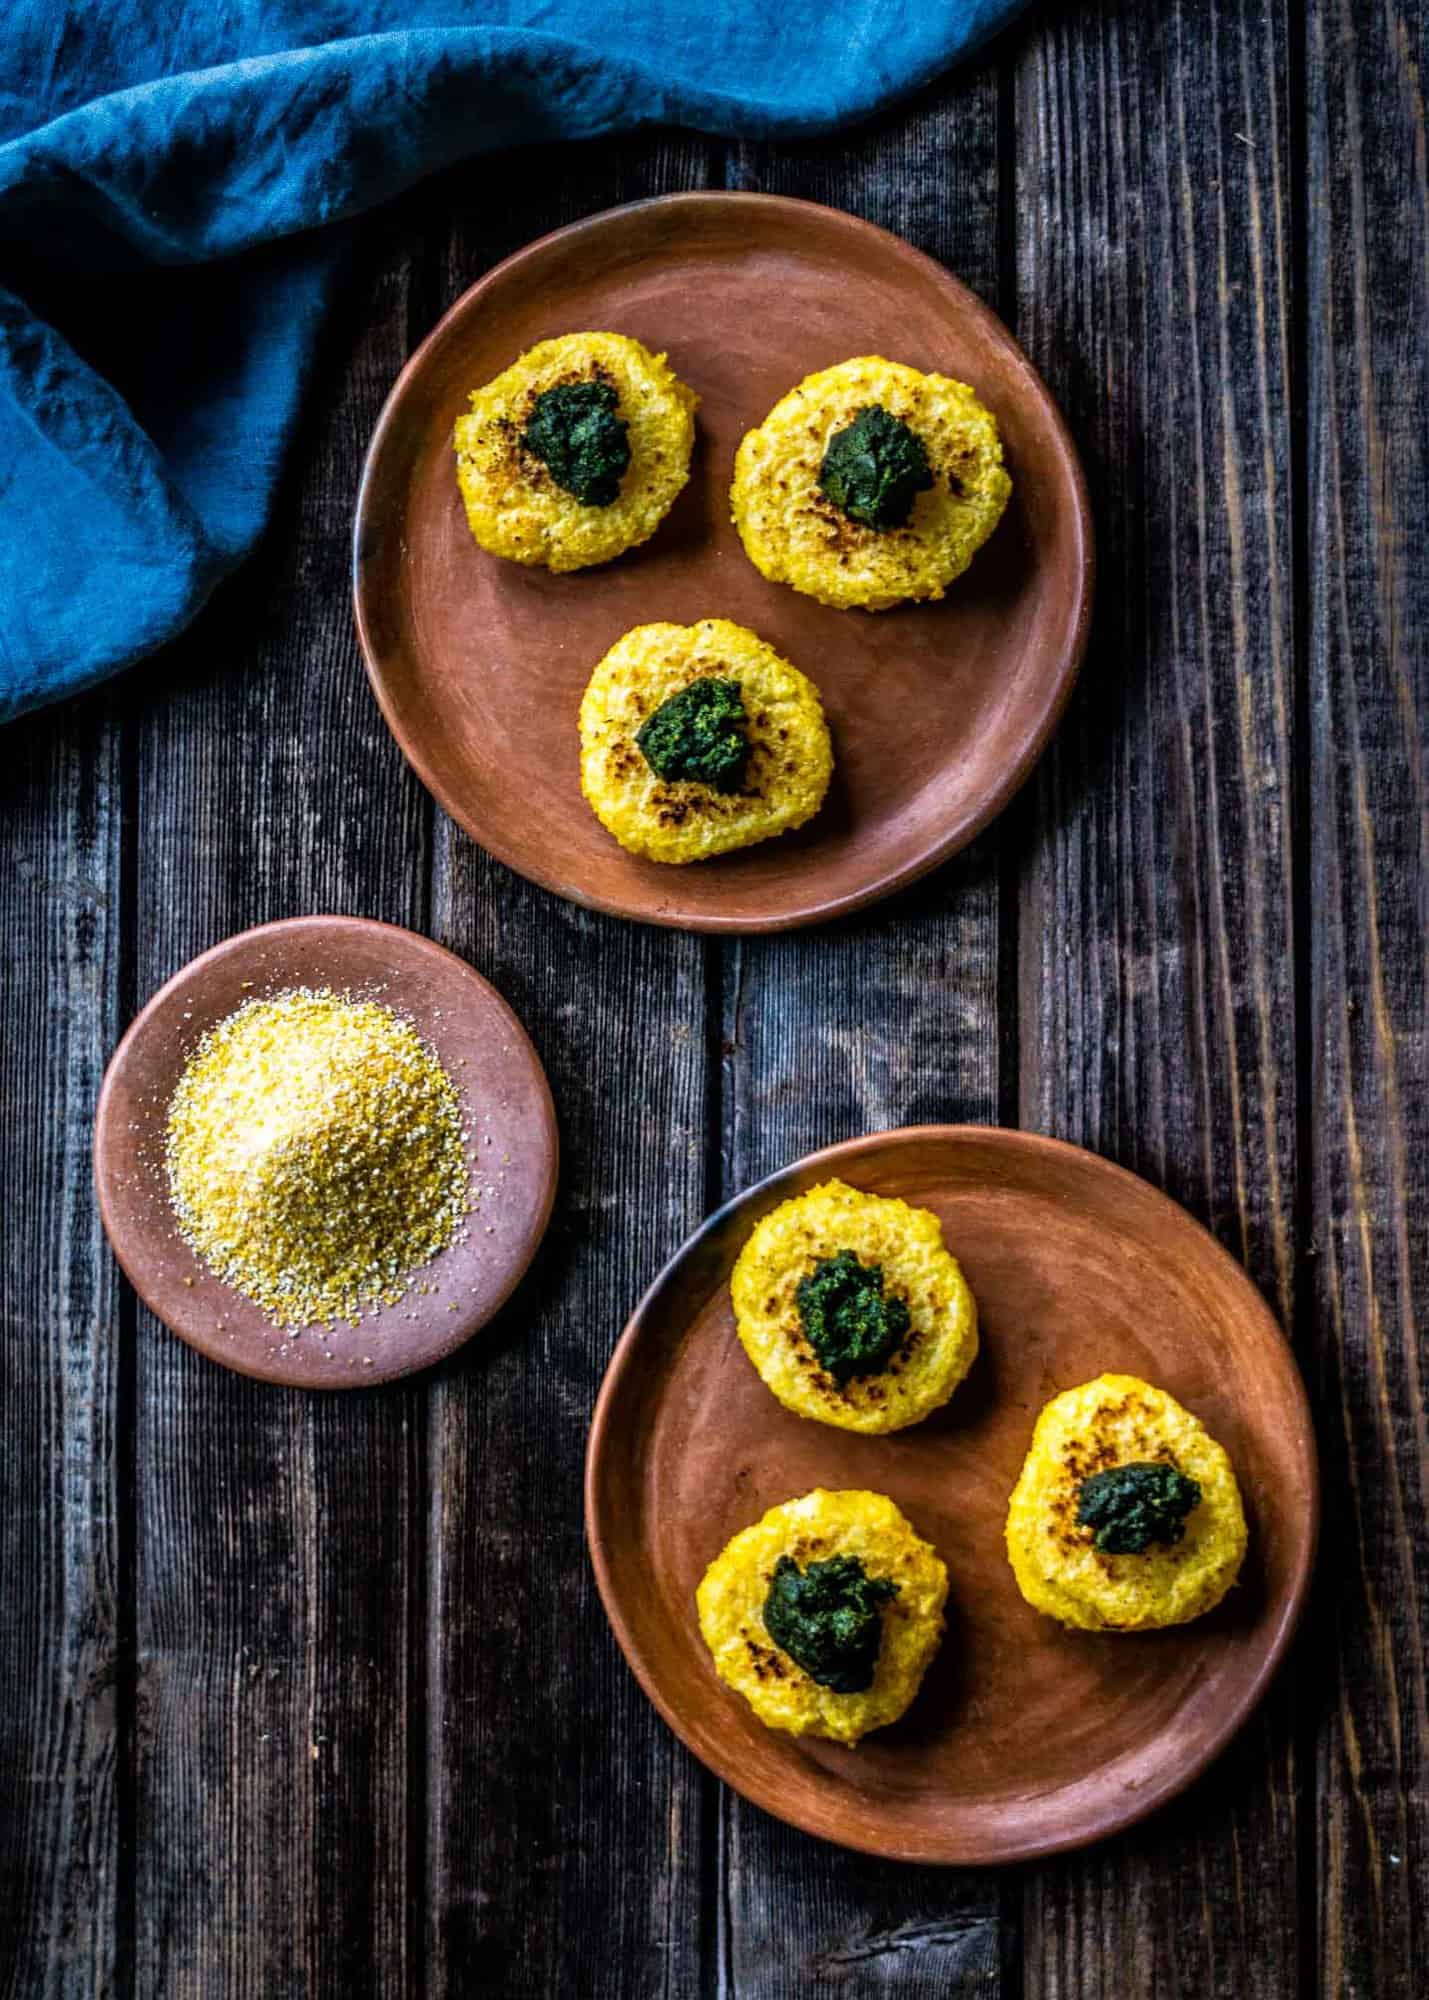 Corn patties topped with pesto on clay plate